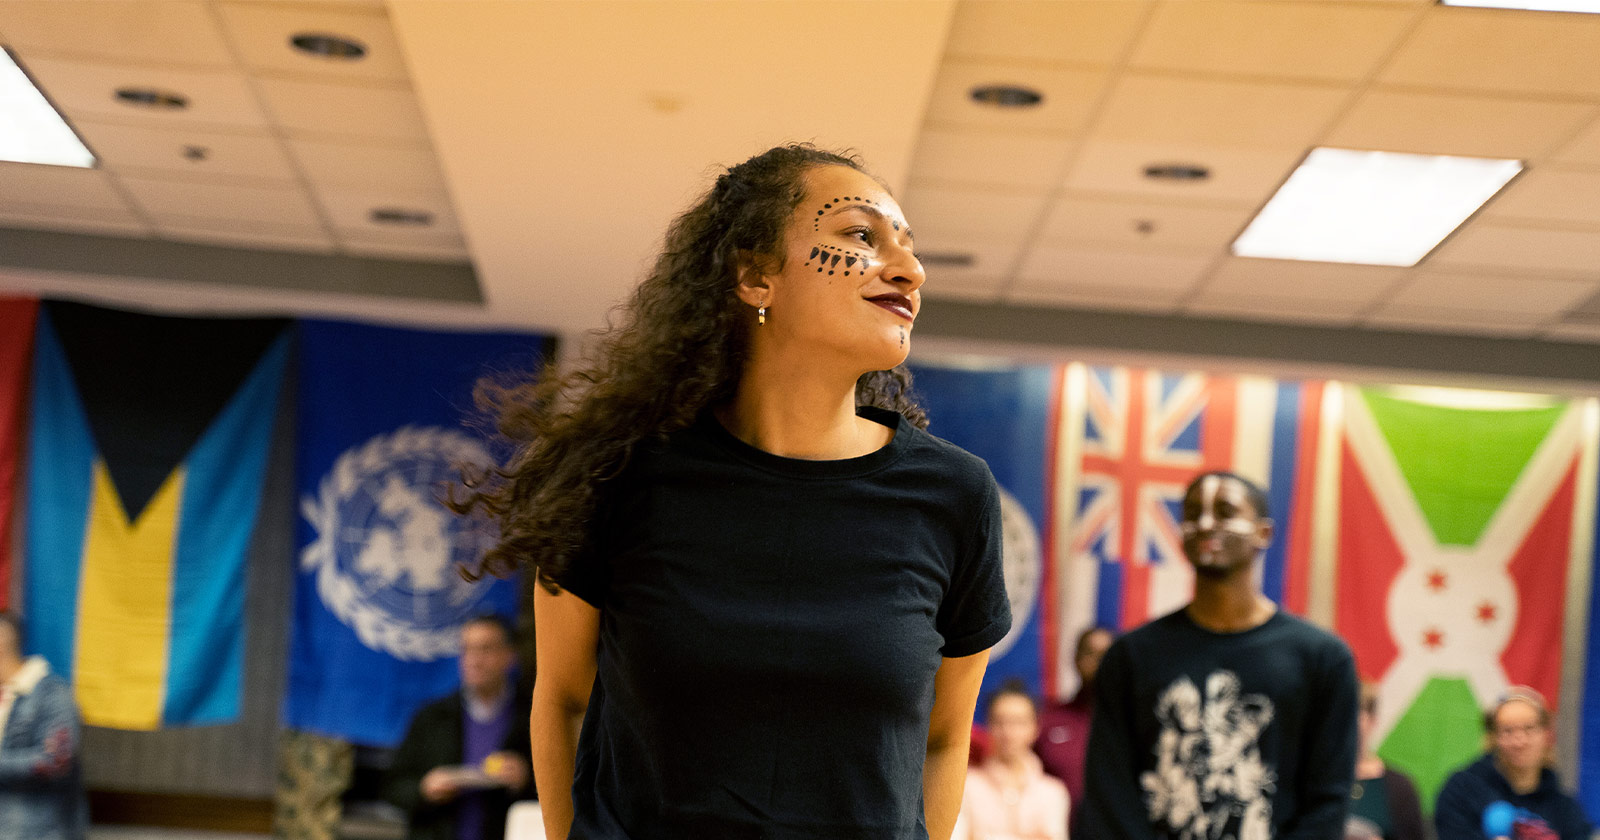 A student from Assumption University dances at the university's multicultural day celebration.